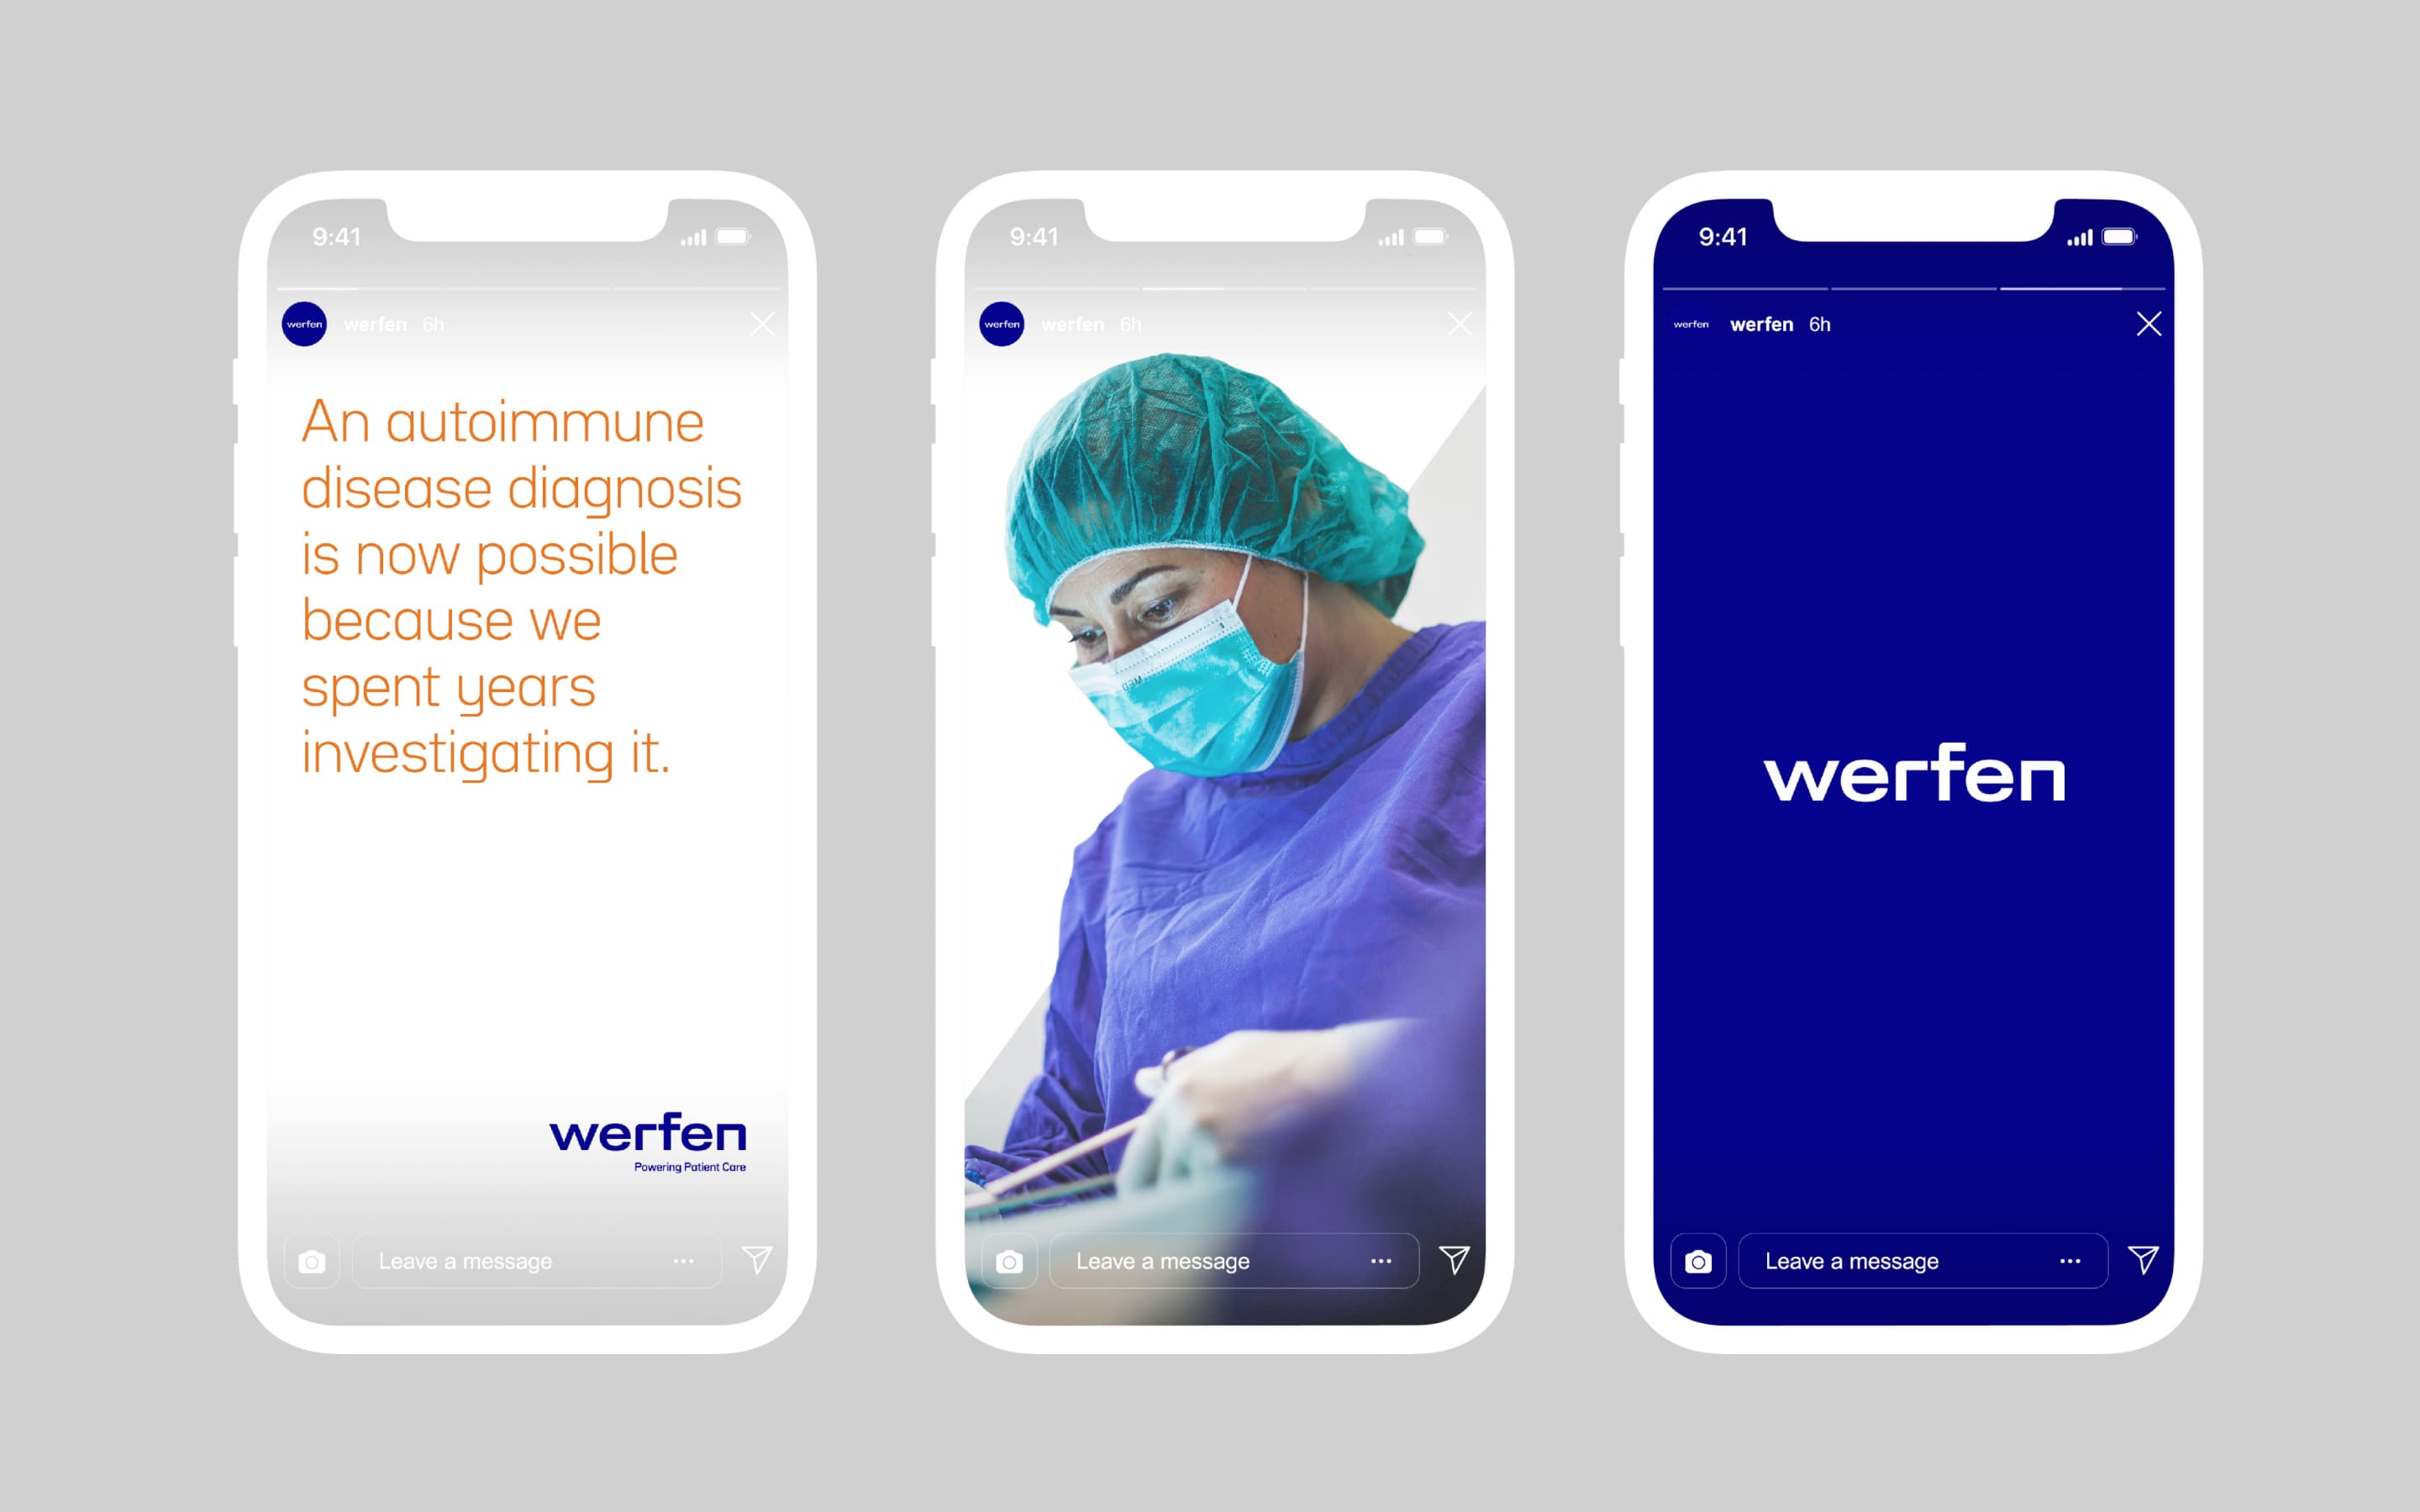 Werfen was founded in Barcelona in 1966 with the purpose of improving patient care around the world thanks to the innovative solutions in specialized diagnostics it has been developing for more than 50 years.
